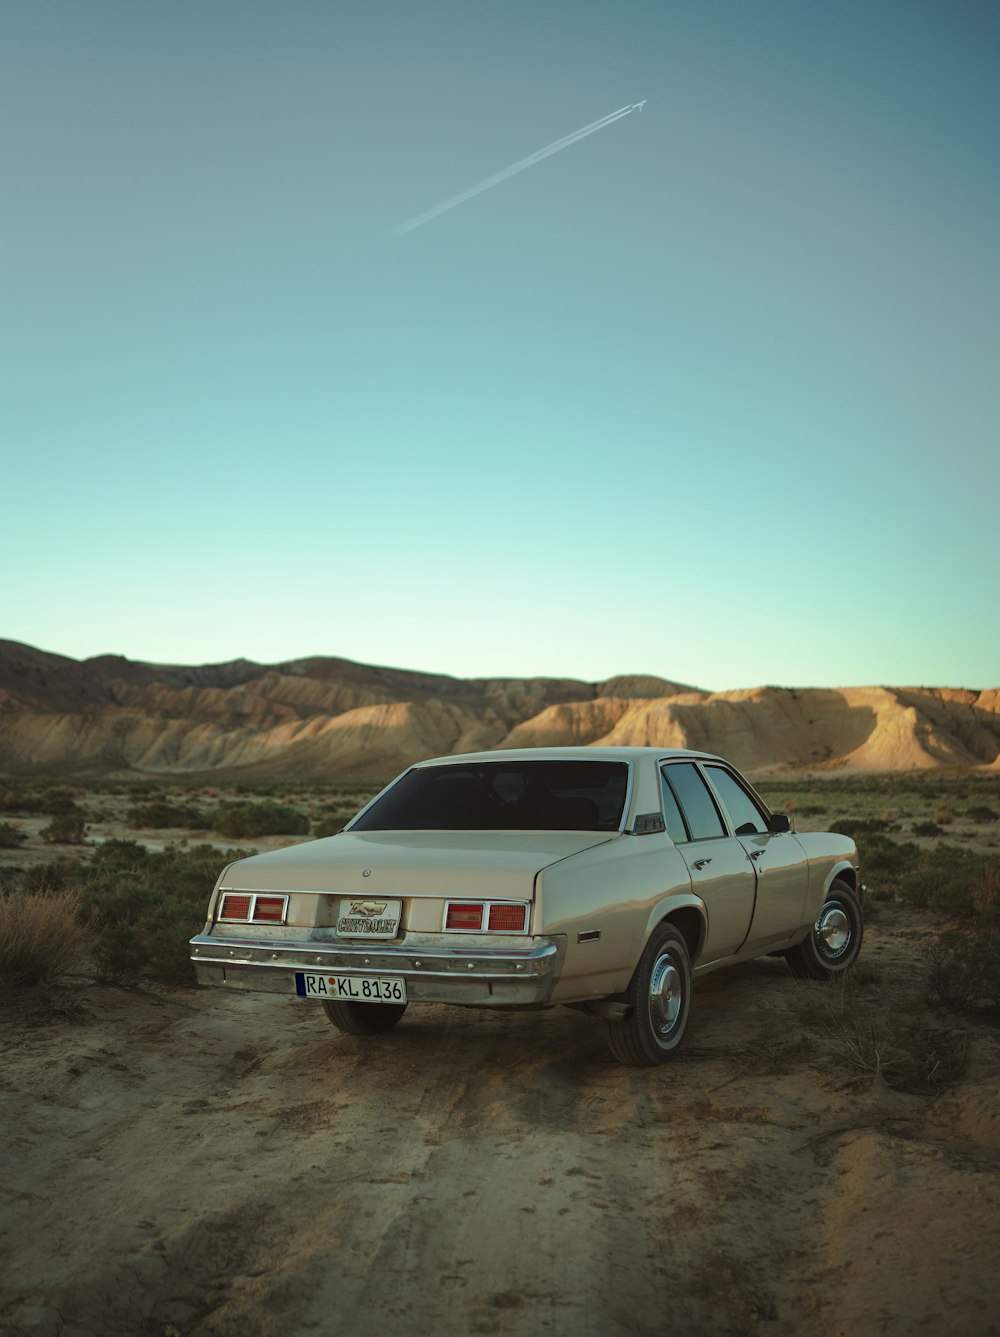 a car parked on a dirt road in the desert